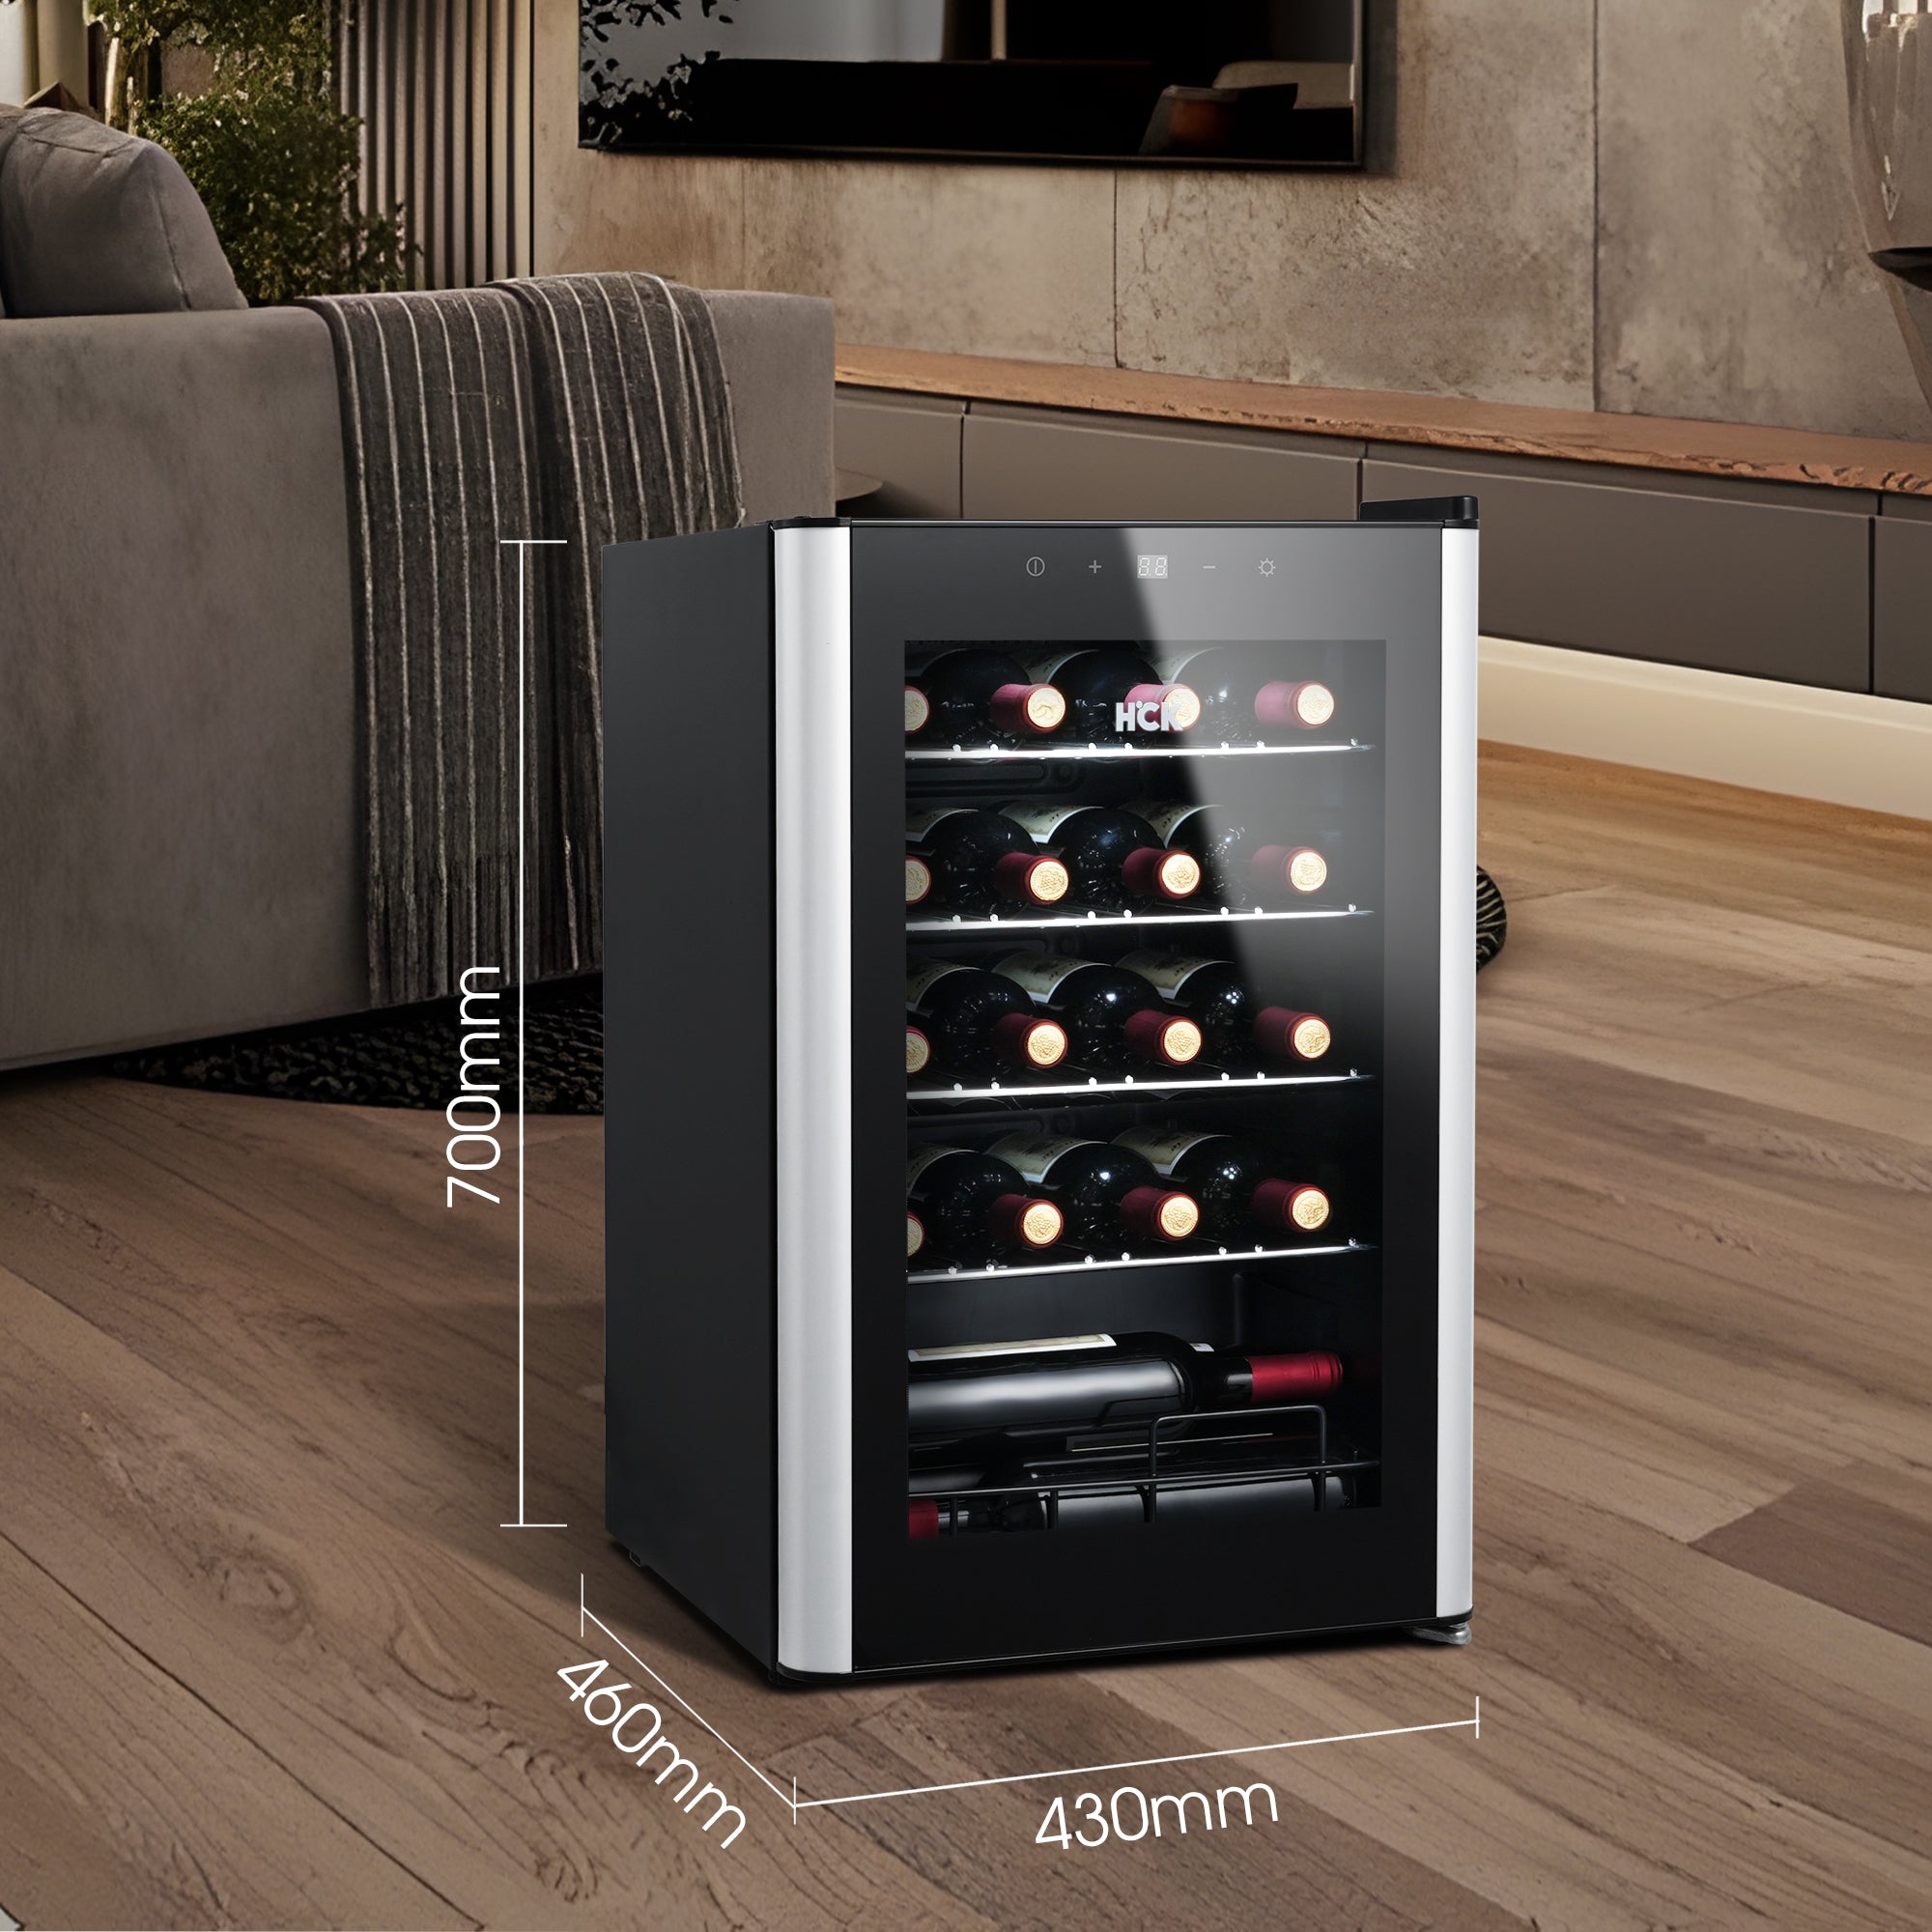 Side view of a living room setup installed with the 70L Freestanding Dual Zone Wine Fridge 24 Bottles, accompanied by lines and parameters to emphasize the product's size